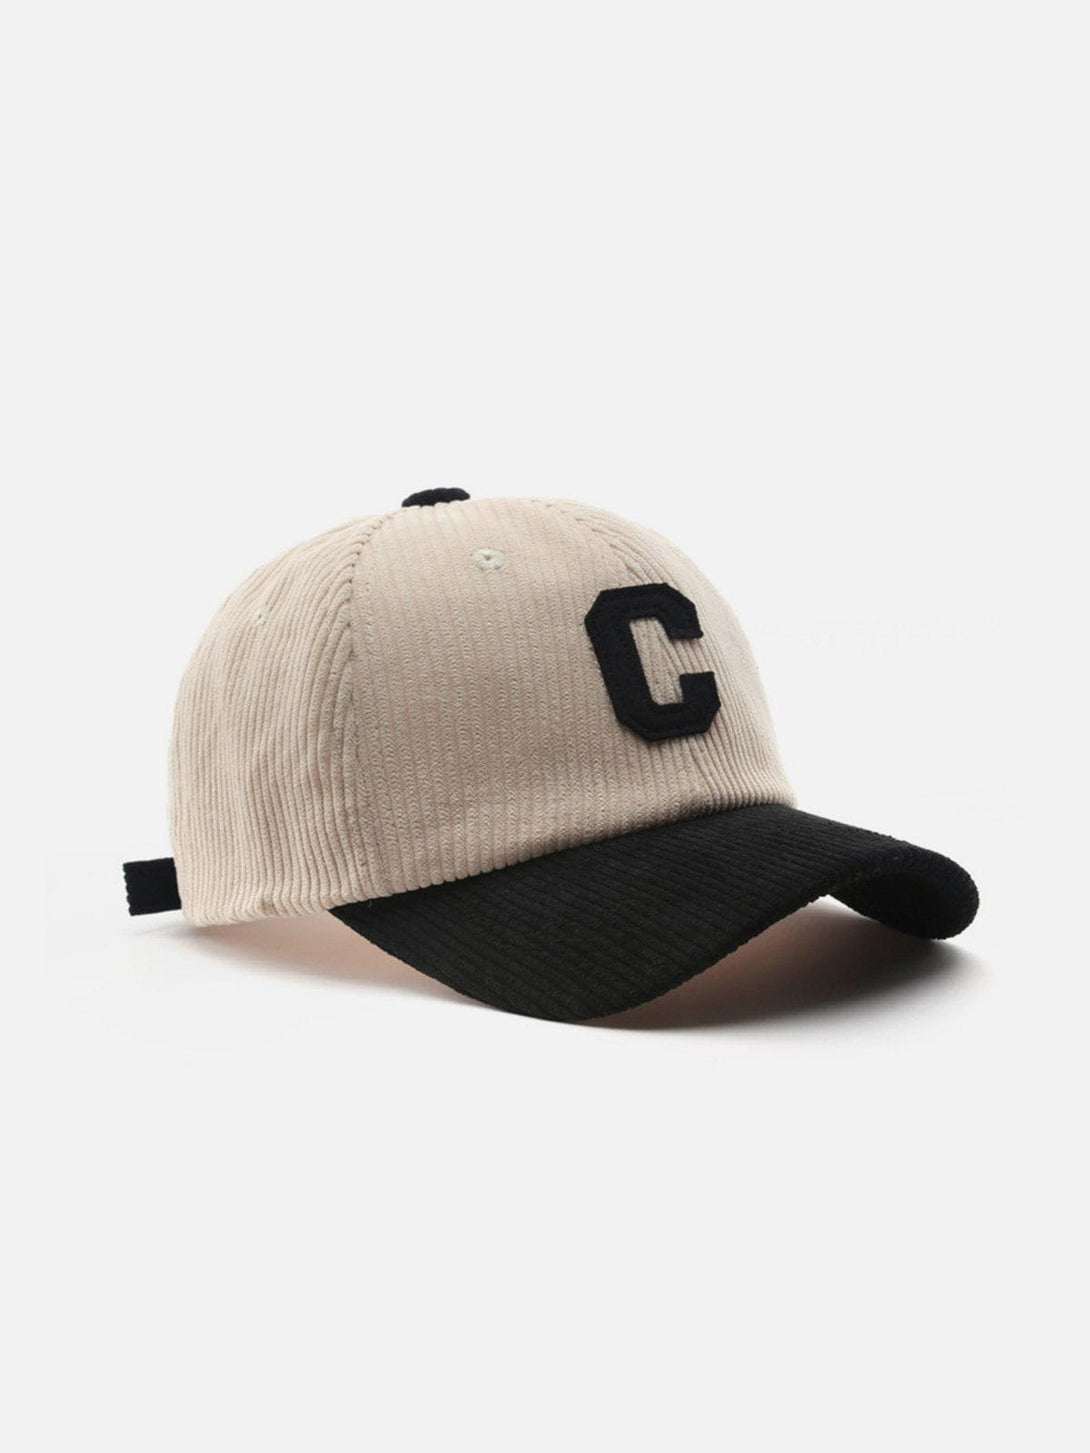 Majesda® - Letter C Patchwork Hat- Outfit Ideas - Streetwear Fashion - majesda.com